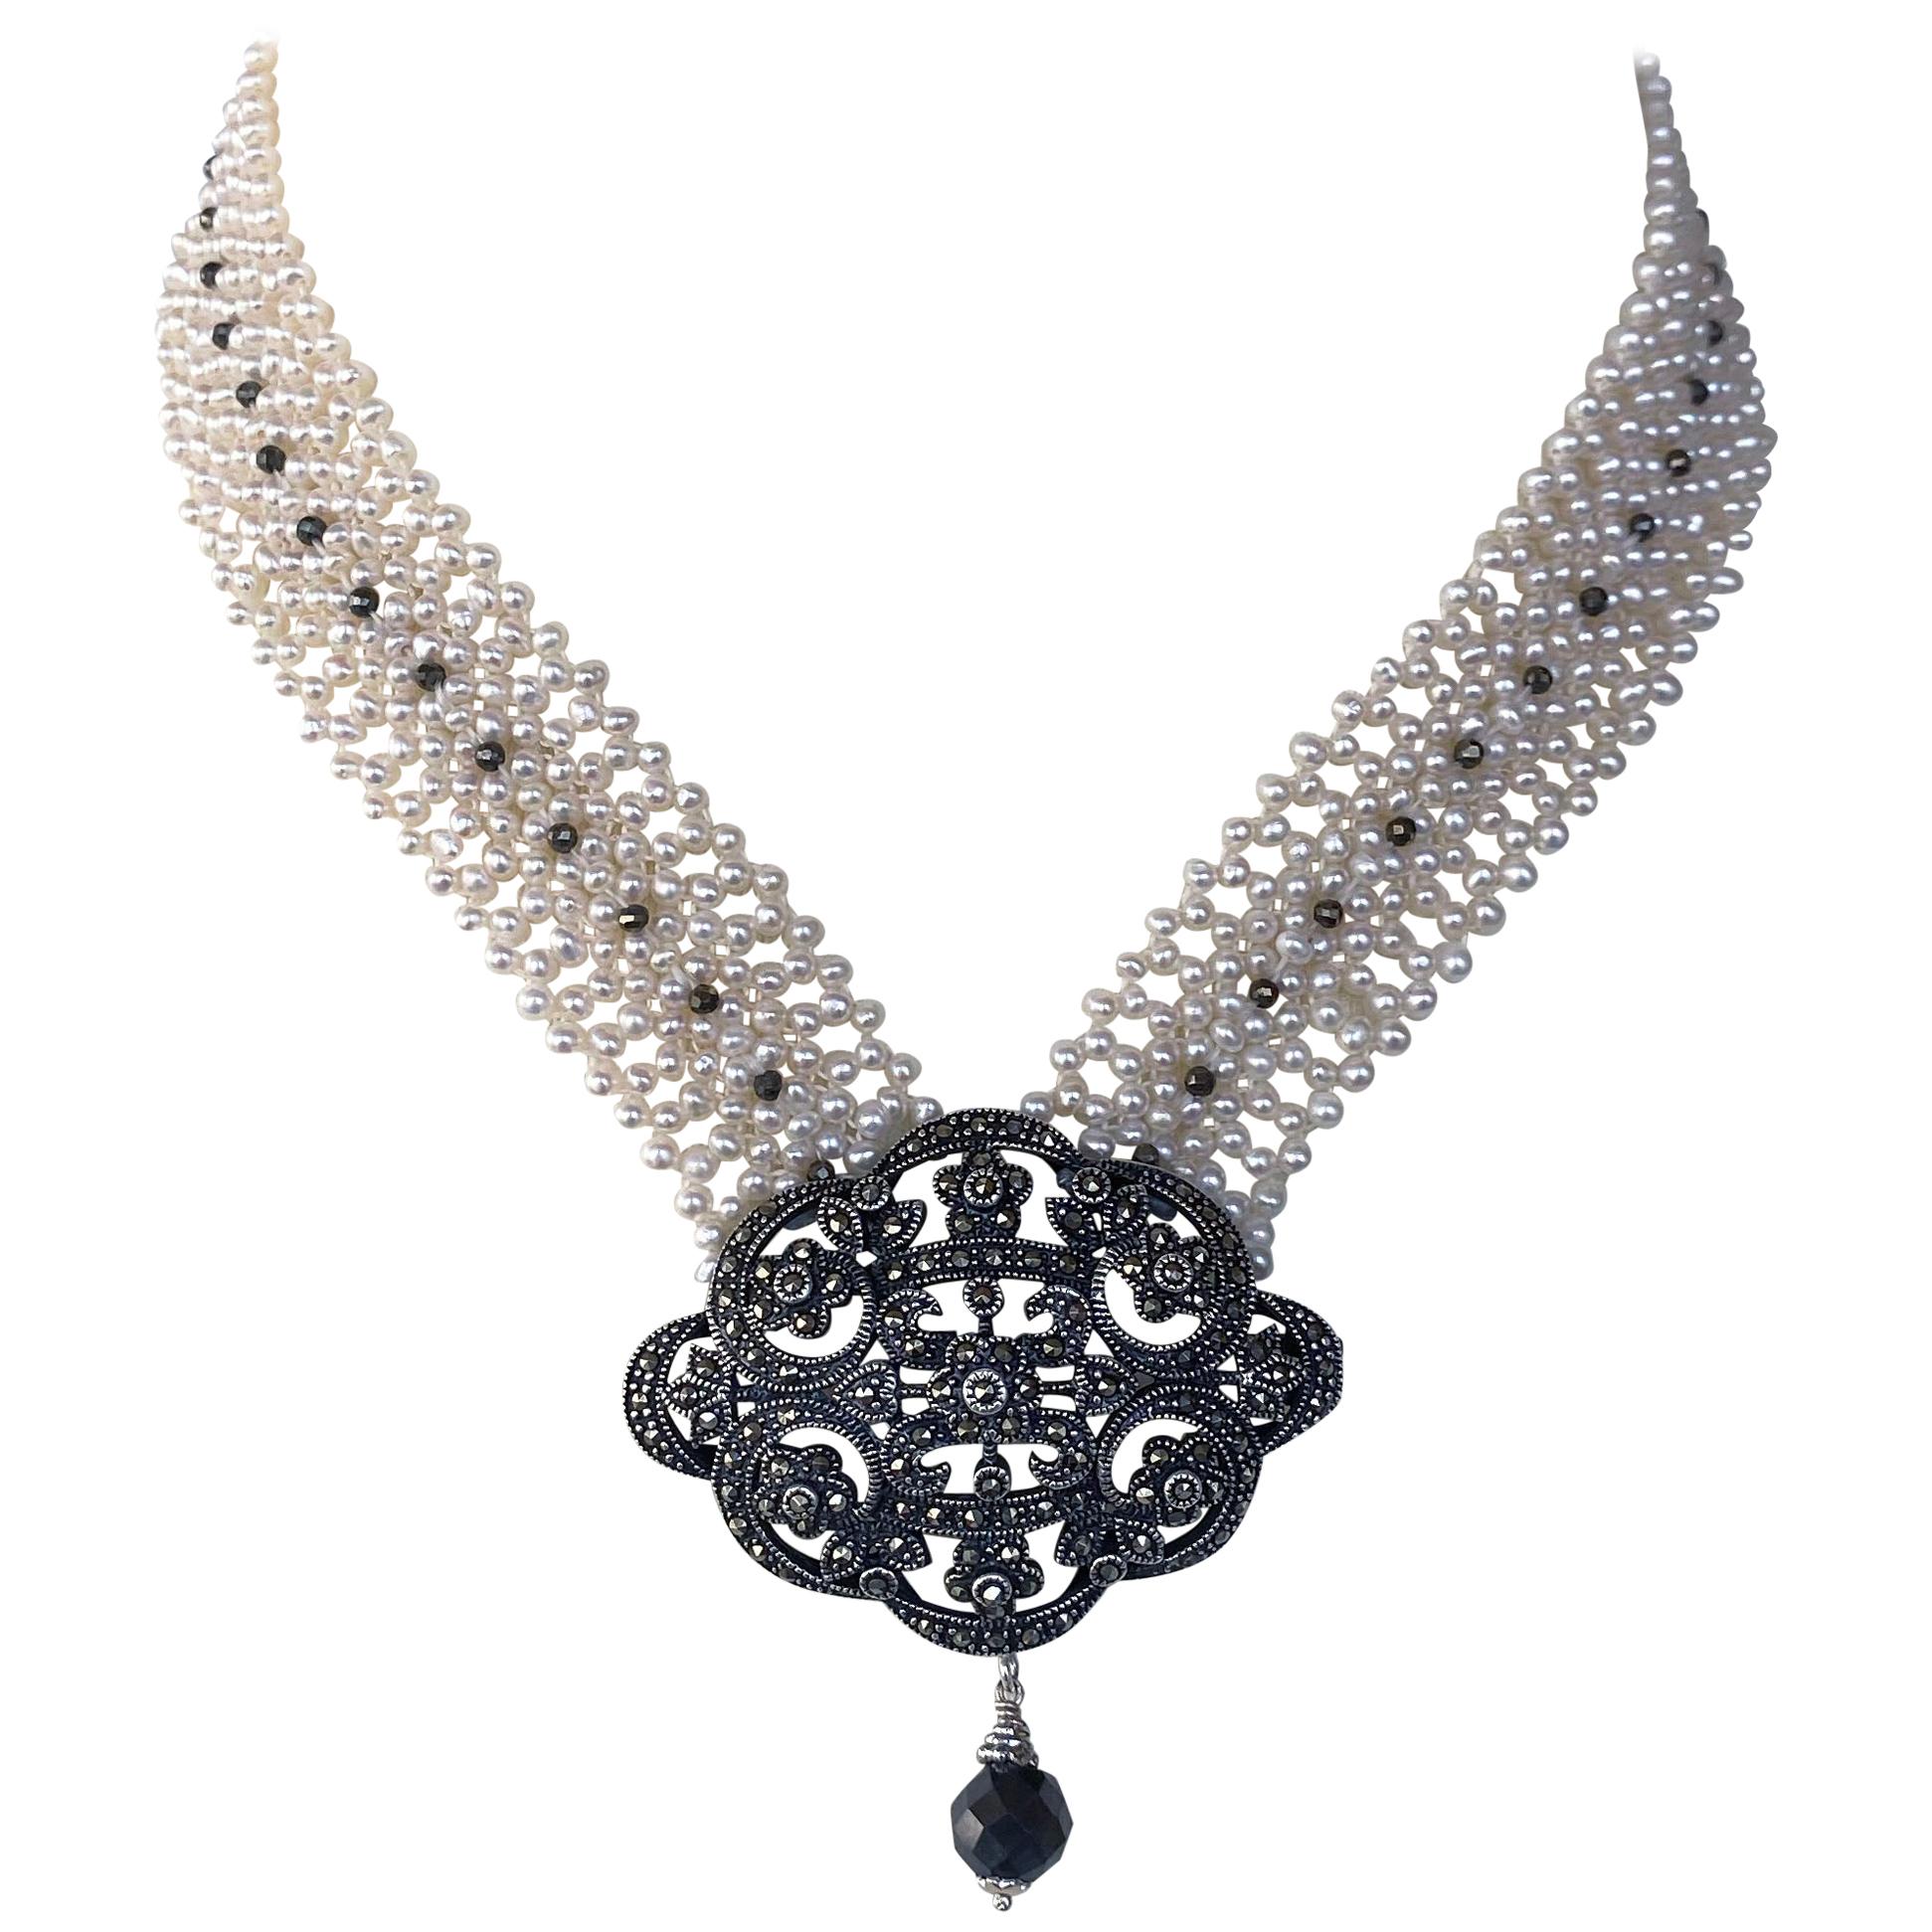 Marina J. Woven Pearl Necklace with Vintage Silver Centerpiece and Black Spinnel For Sale